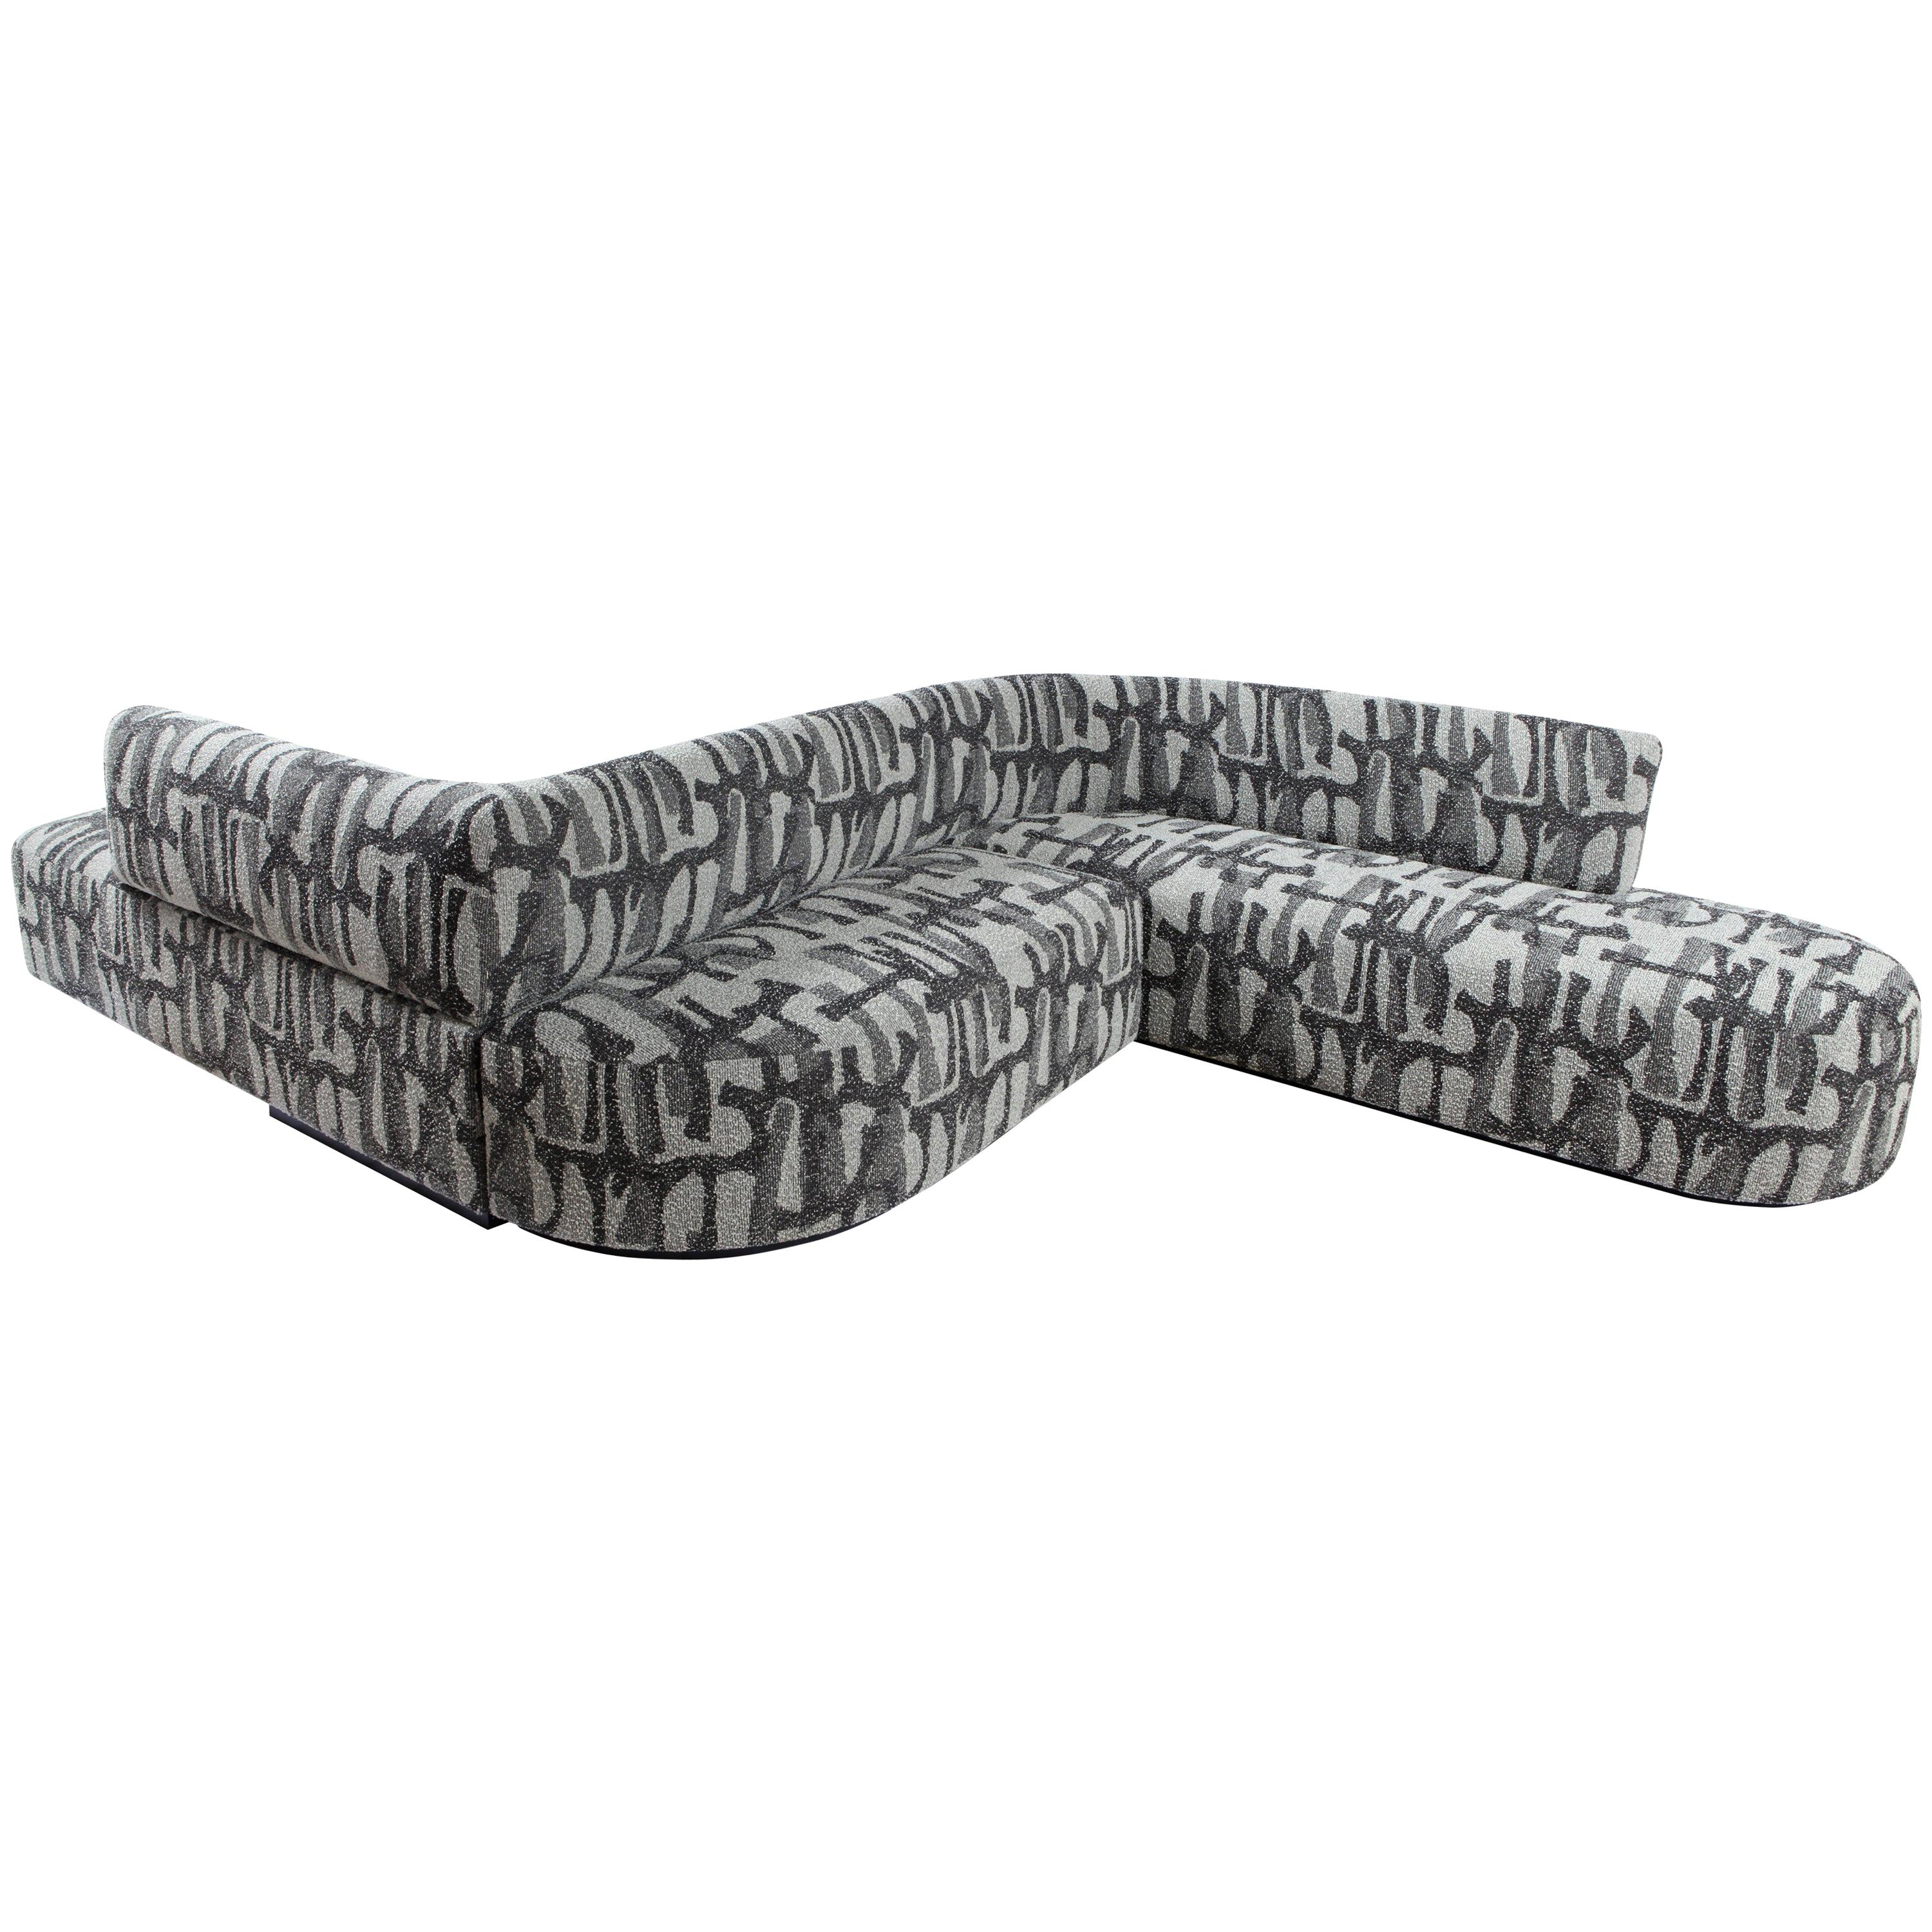 Vincent Curved Sofa Designed for Salon A+D Upholstered in Tibor Fabric